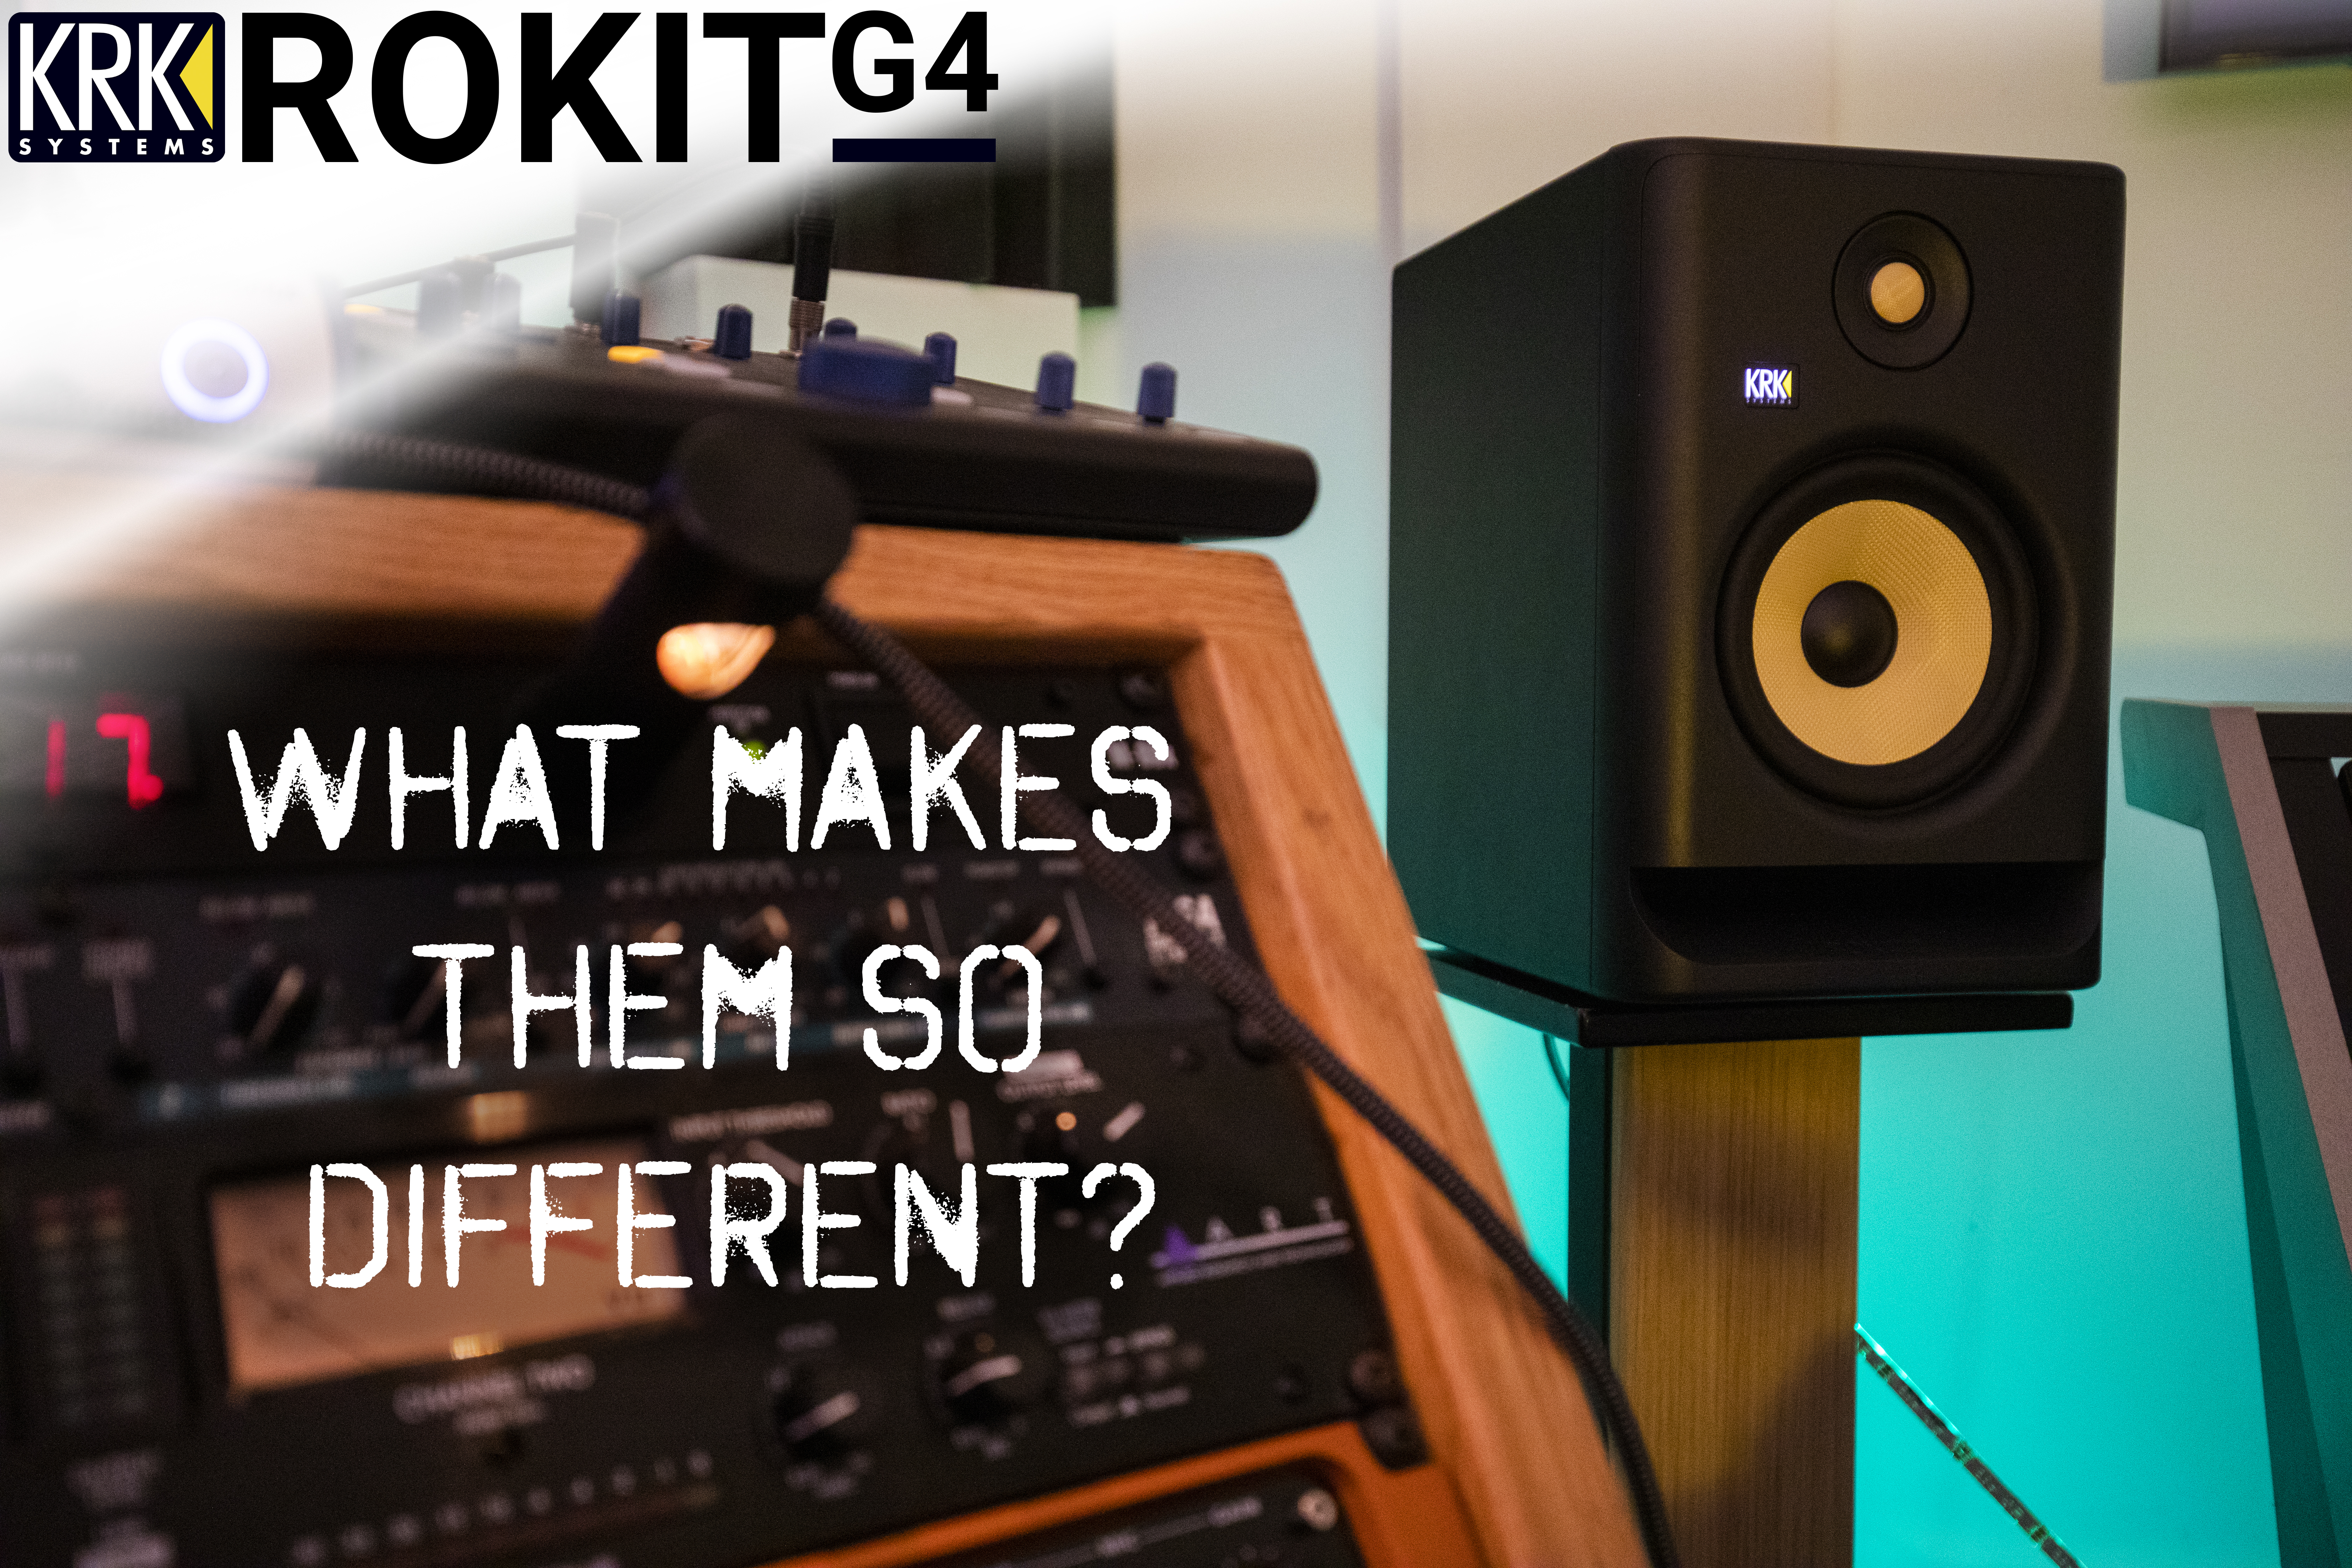 rokit g4 what makes them different